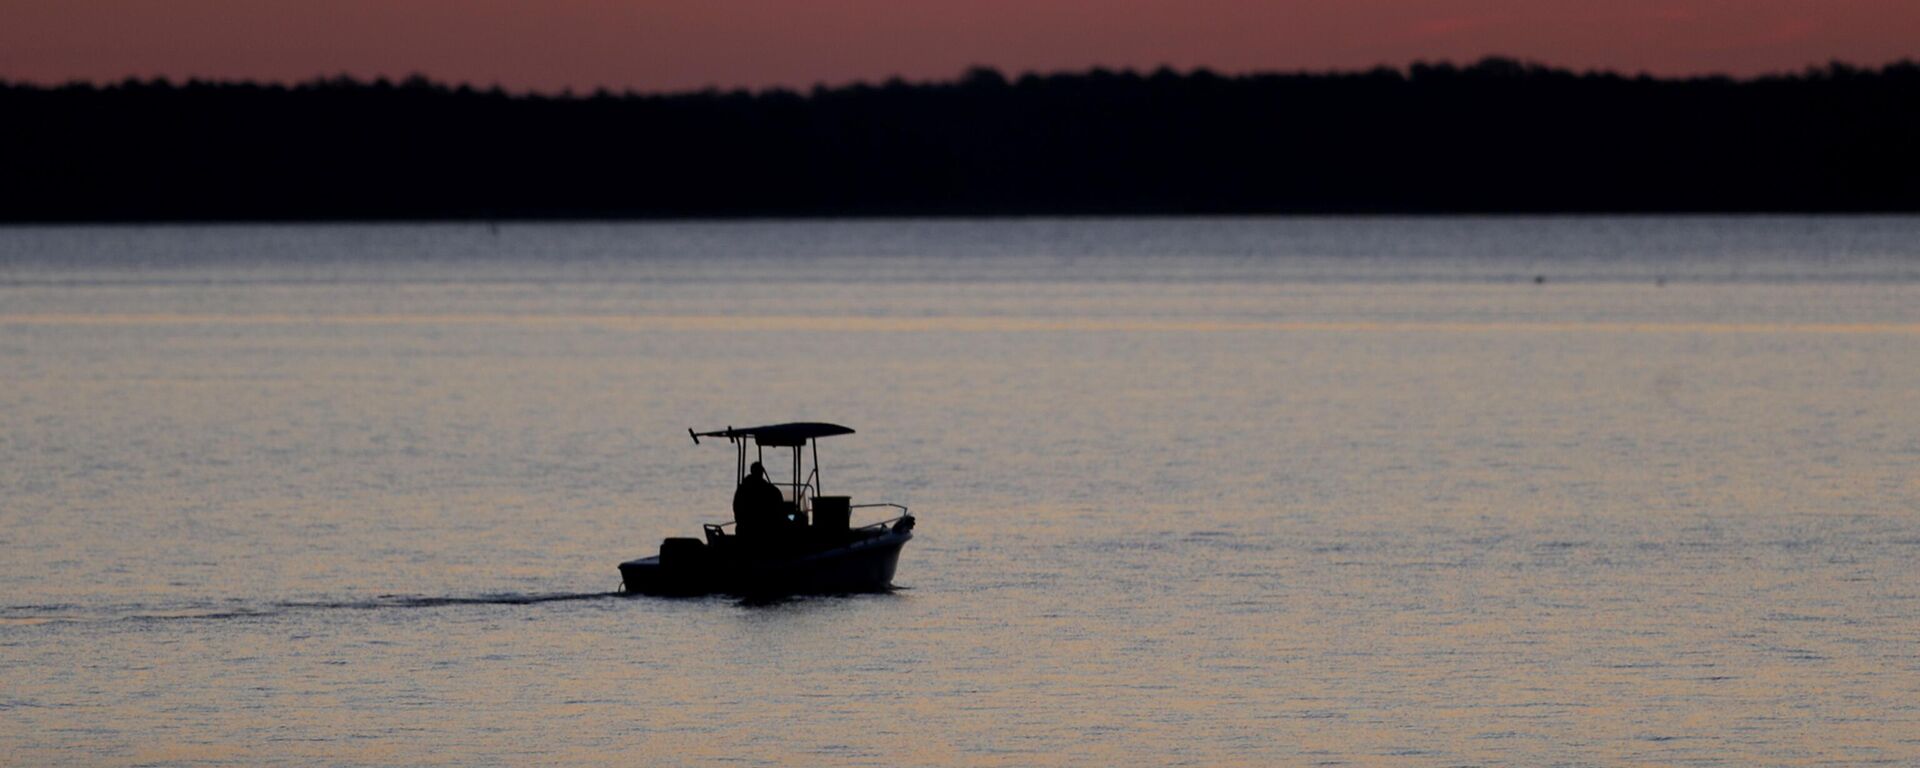 FILE - A small boat travels along the Honga River near the Chesapeake Bay, as the sky lights up at sunrise in Fishing Creek, Md., May 14, 2020. In an evaluation released on Thursday, Jan. 5, 2023, the Chesapeake Bay Foundation, an environmental group, gave the Chesapeake Bay watershed a D-plus grade, the same grade it gave the watershed in its last report in 2020.  - Sputnik International, 1920, 17.01.2023